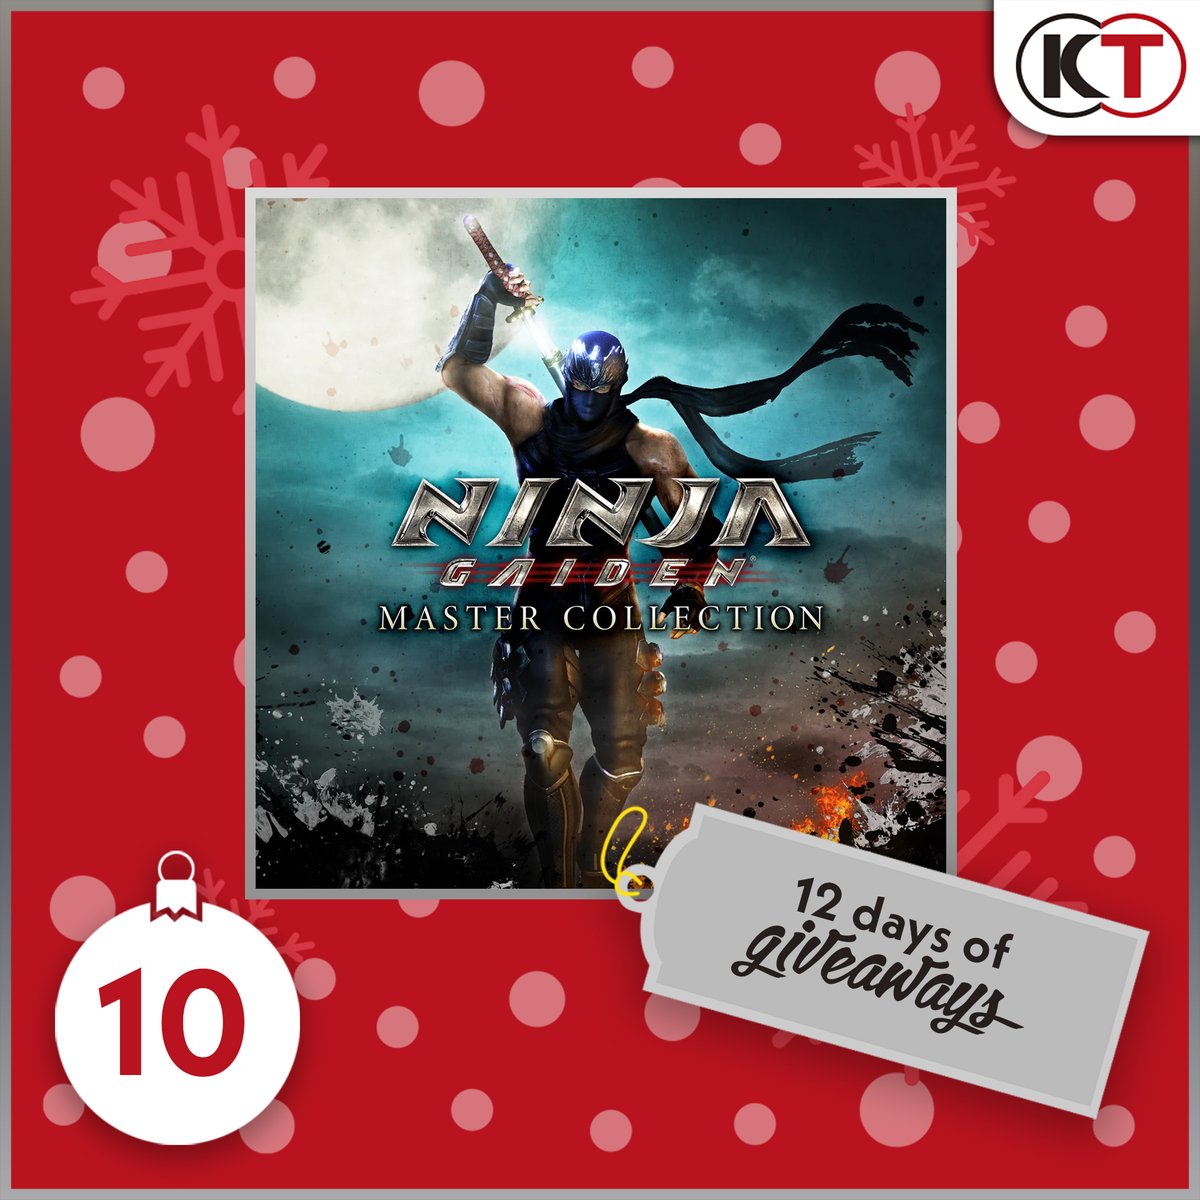 Day 10 of the #KTAdventCalendar, we have a digital copy of #NINJAGAIDEN Master Collection to #win. To enter: > Follow us @koeitecmoeurope > Comment with #KTAdventCalendar > RT A random winner will be chosen at 11:59 GMT on the following day and notified in the comment section.